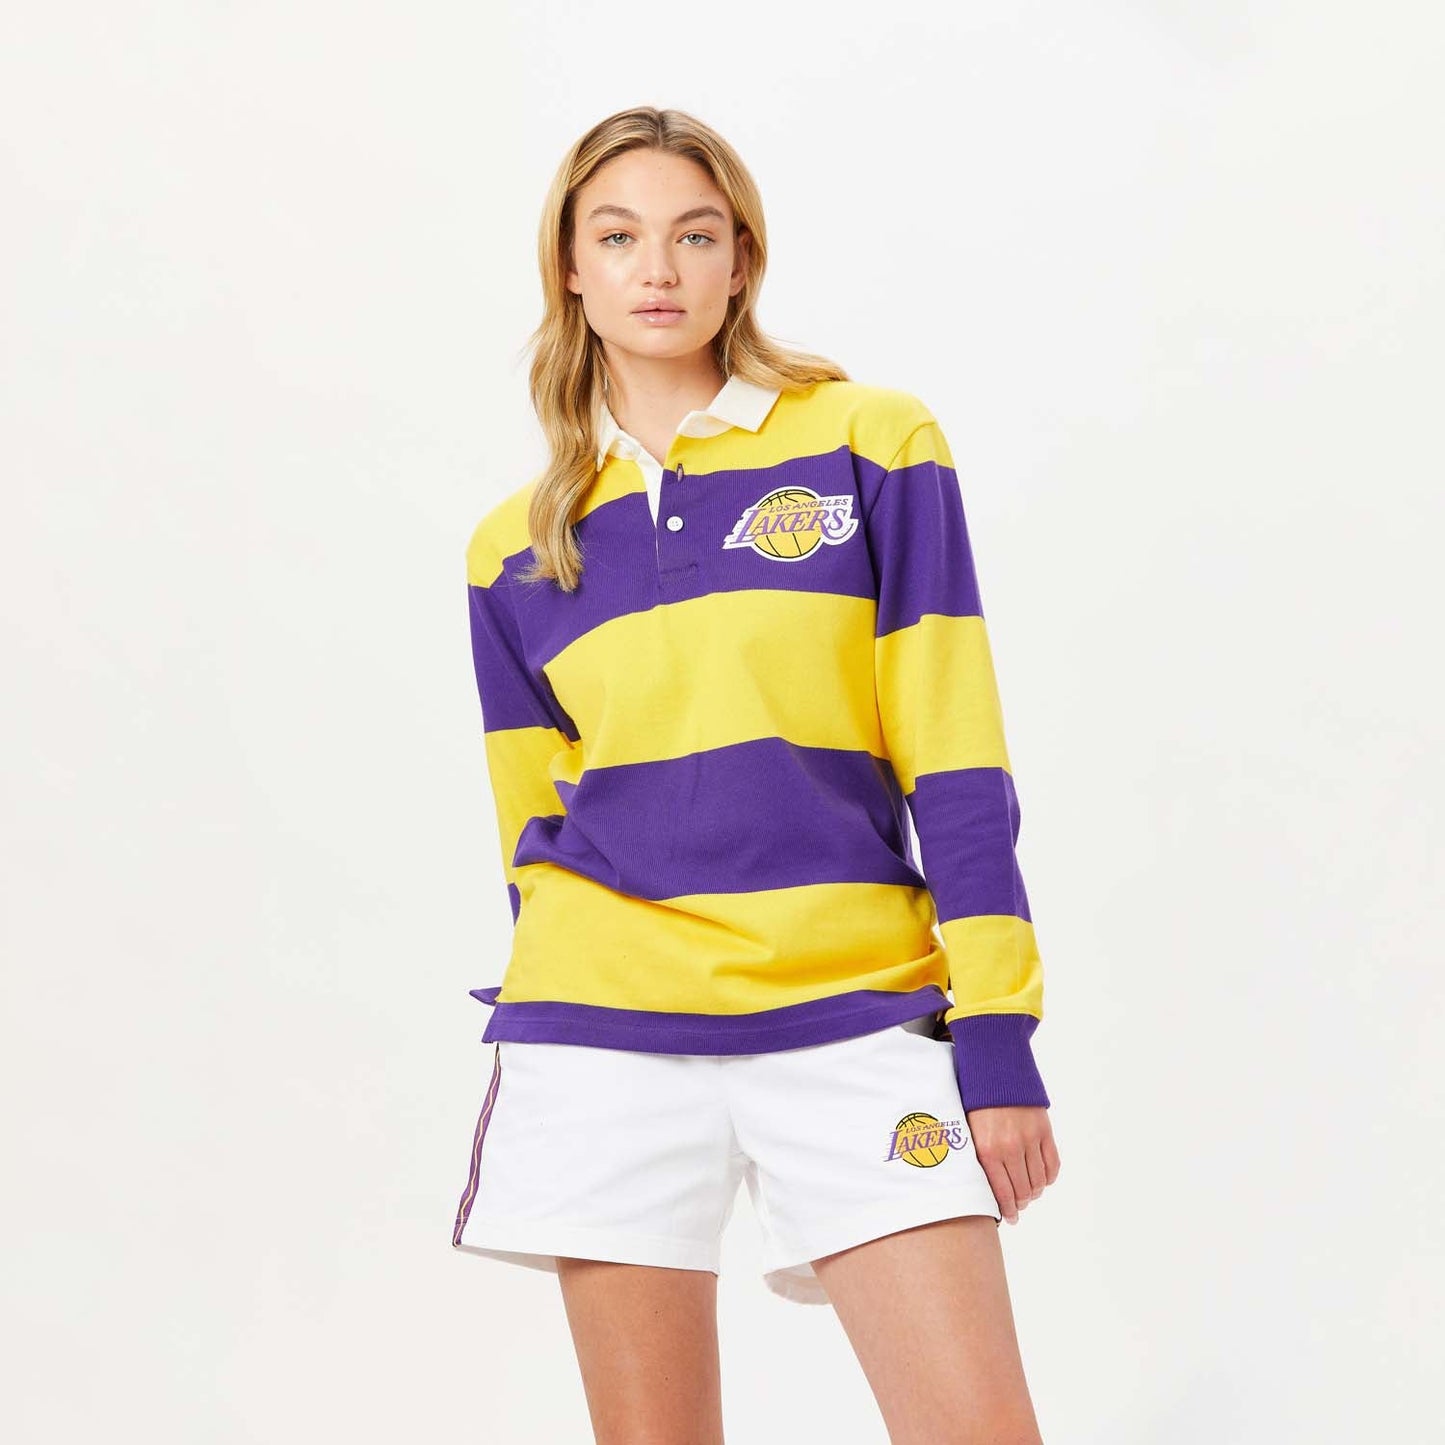 Rowing Blazers x NBA Los Angeles Lakers Rugby Shorts